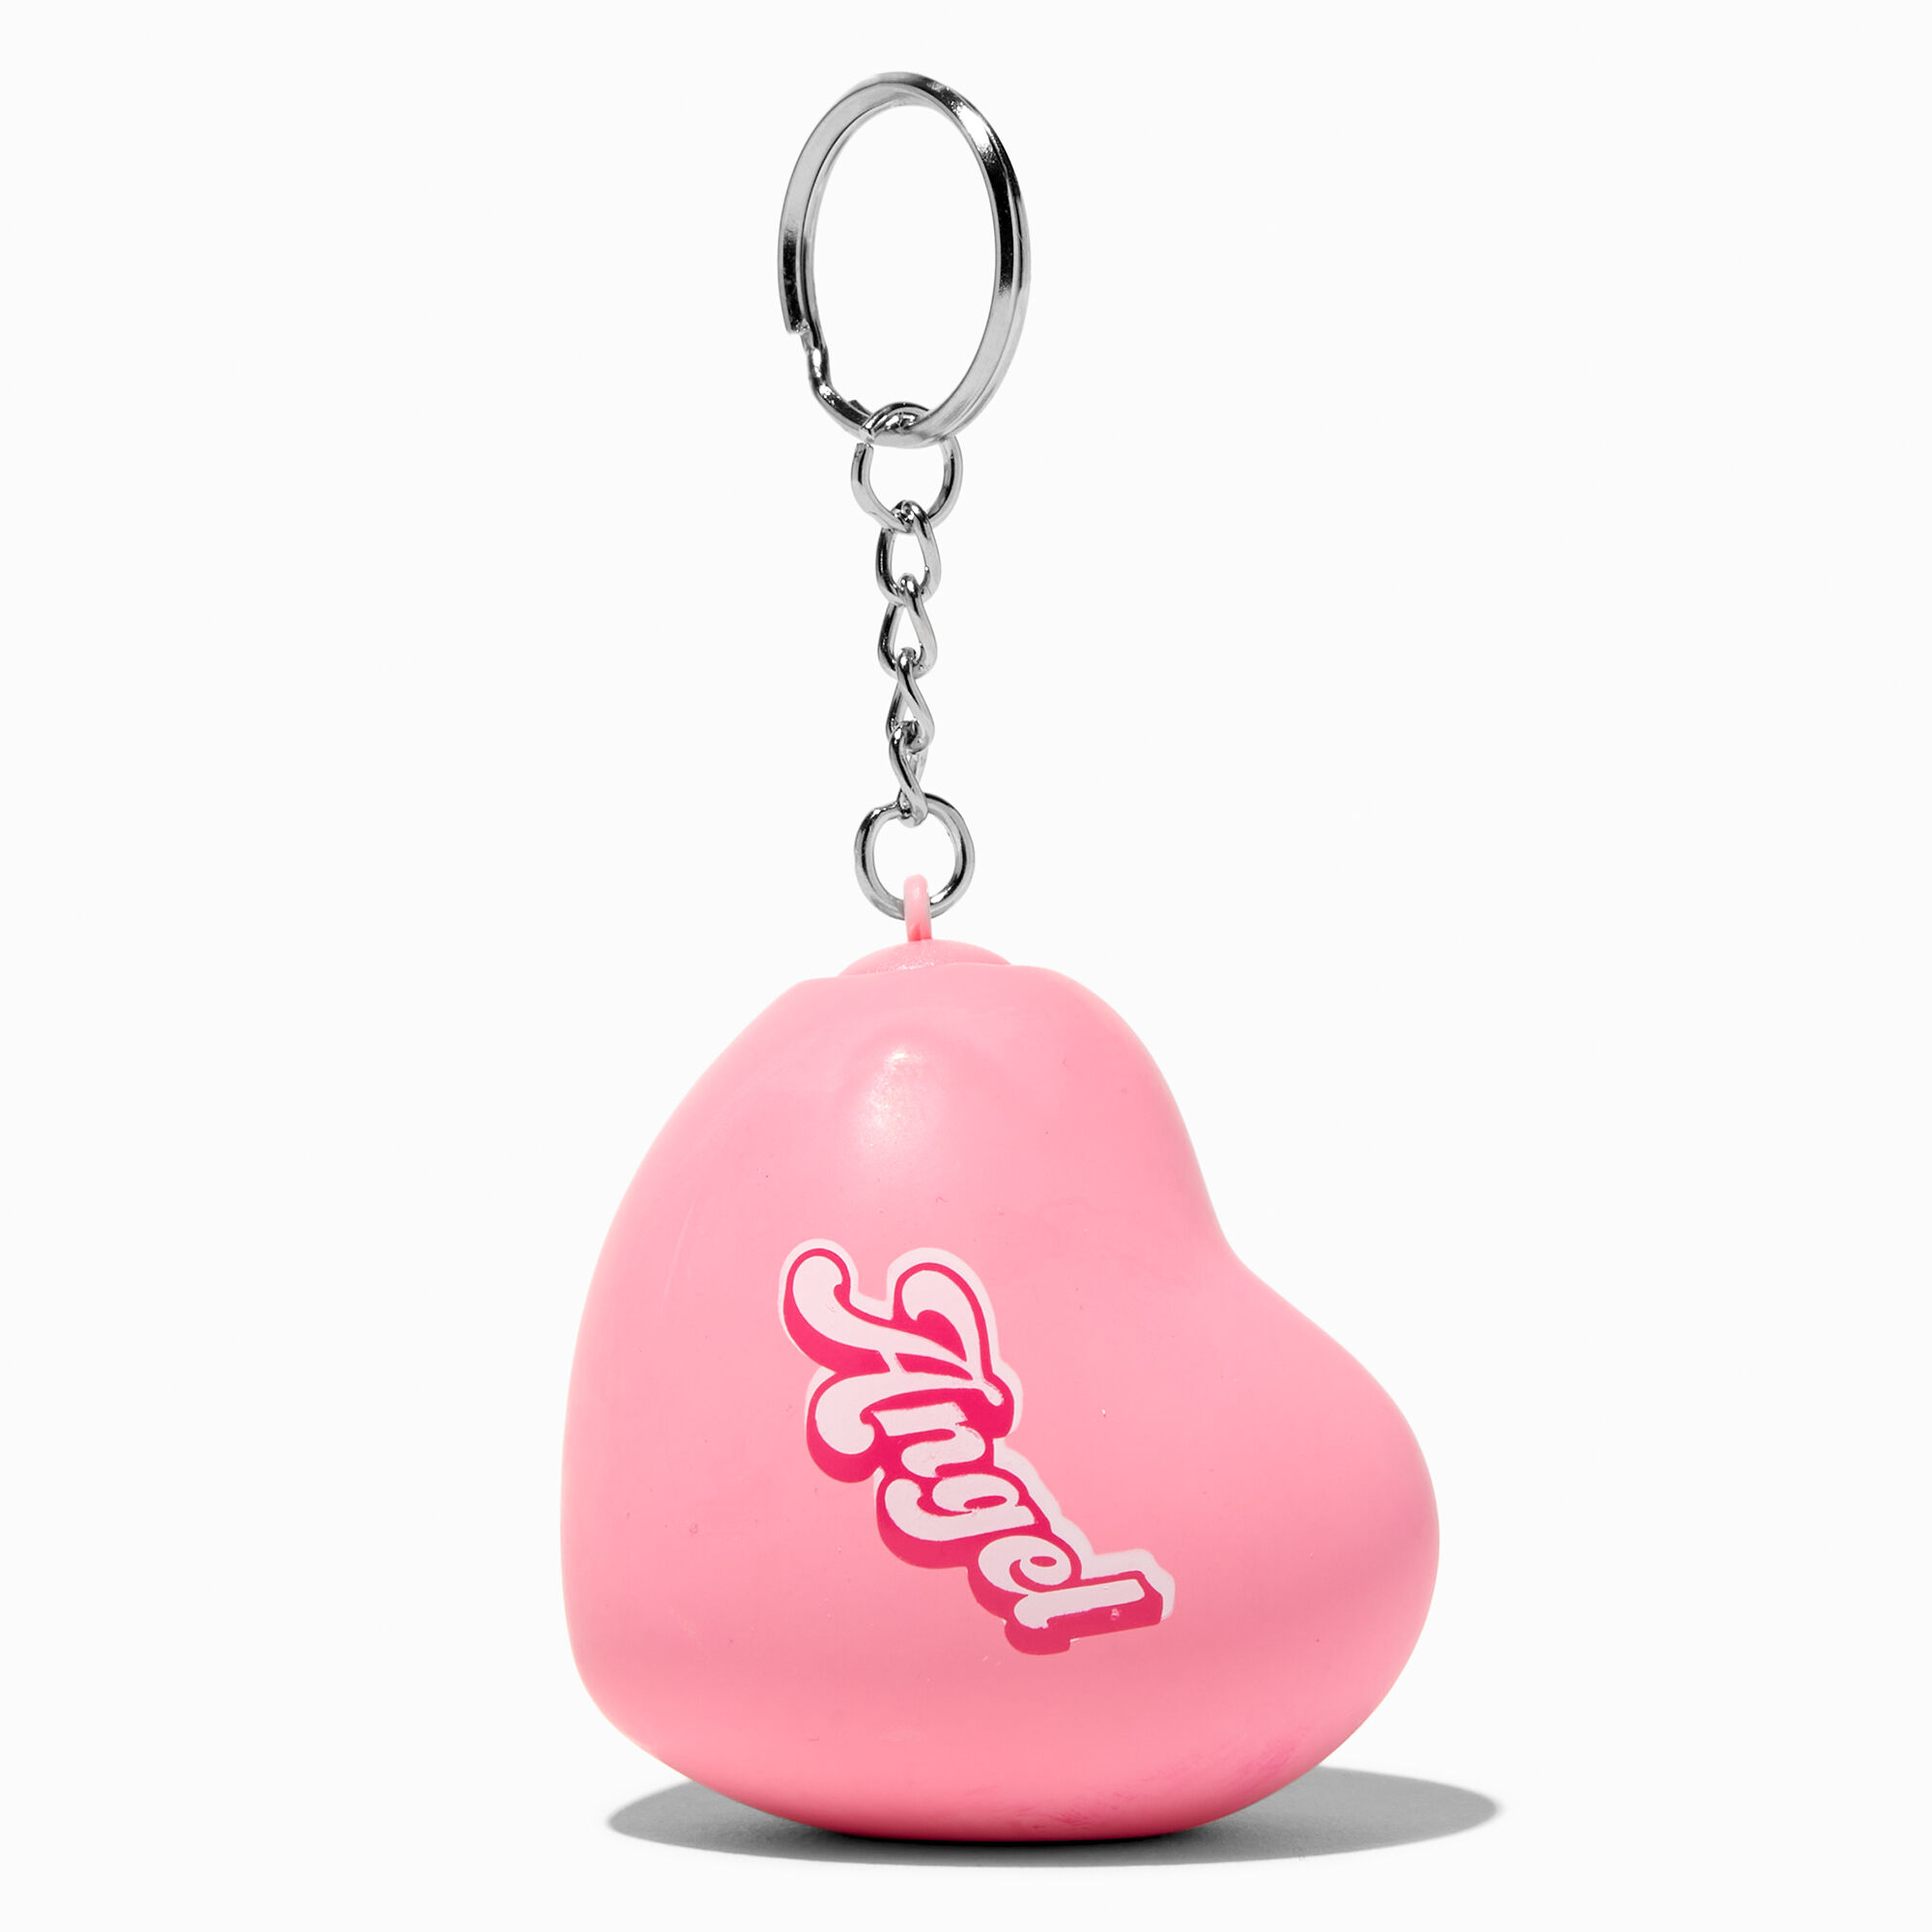 View Claires Angel Heart Stress Ball Keychain Pink information